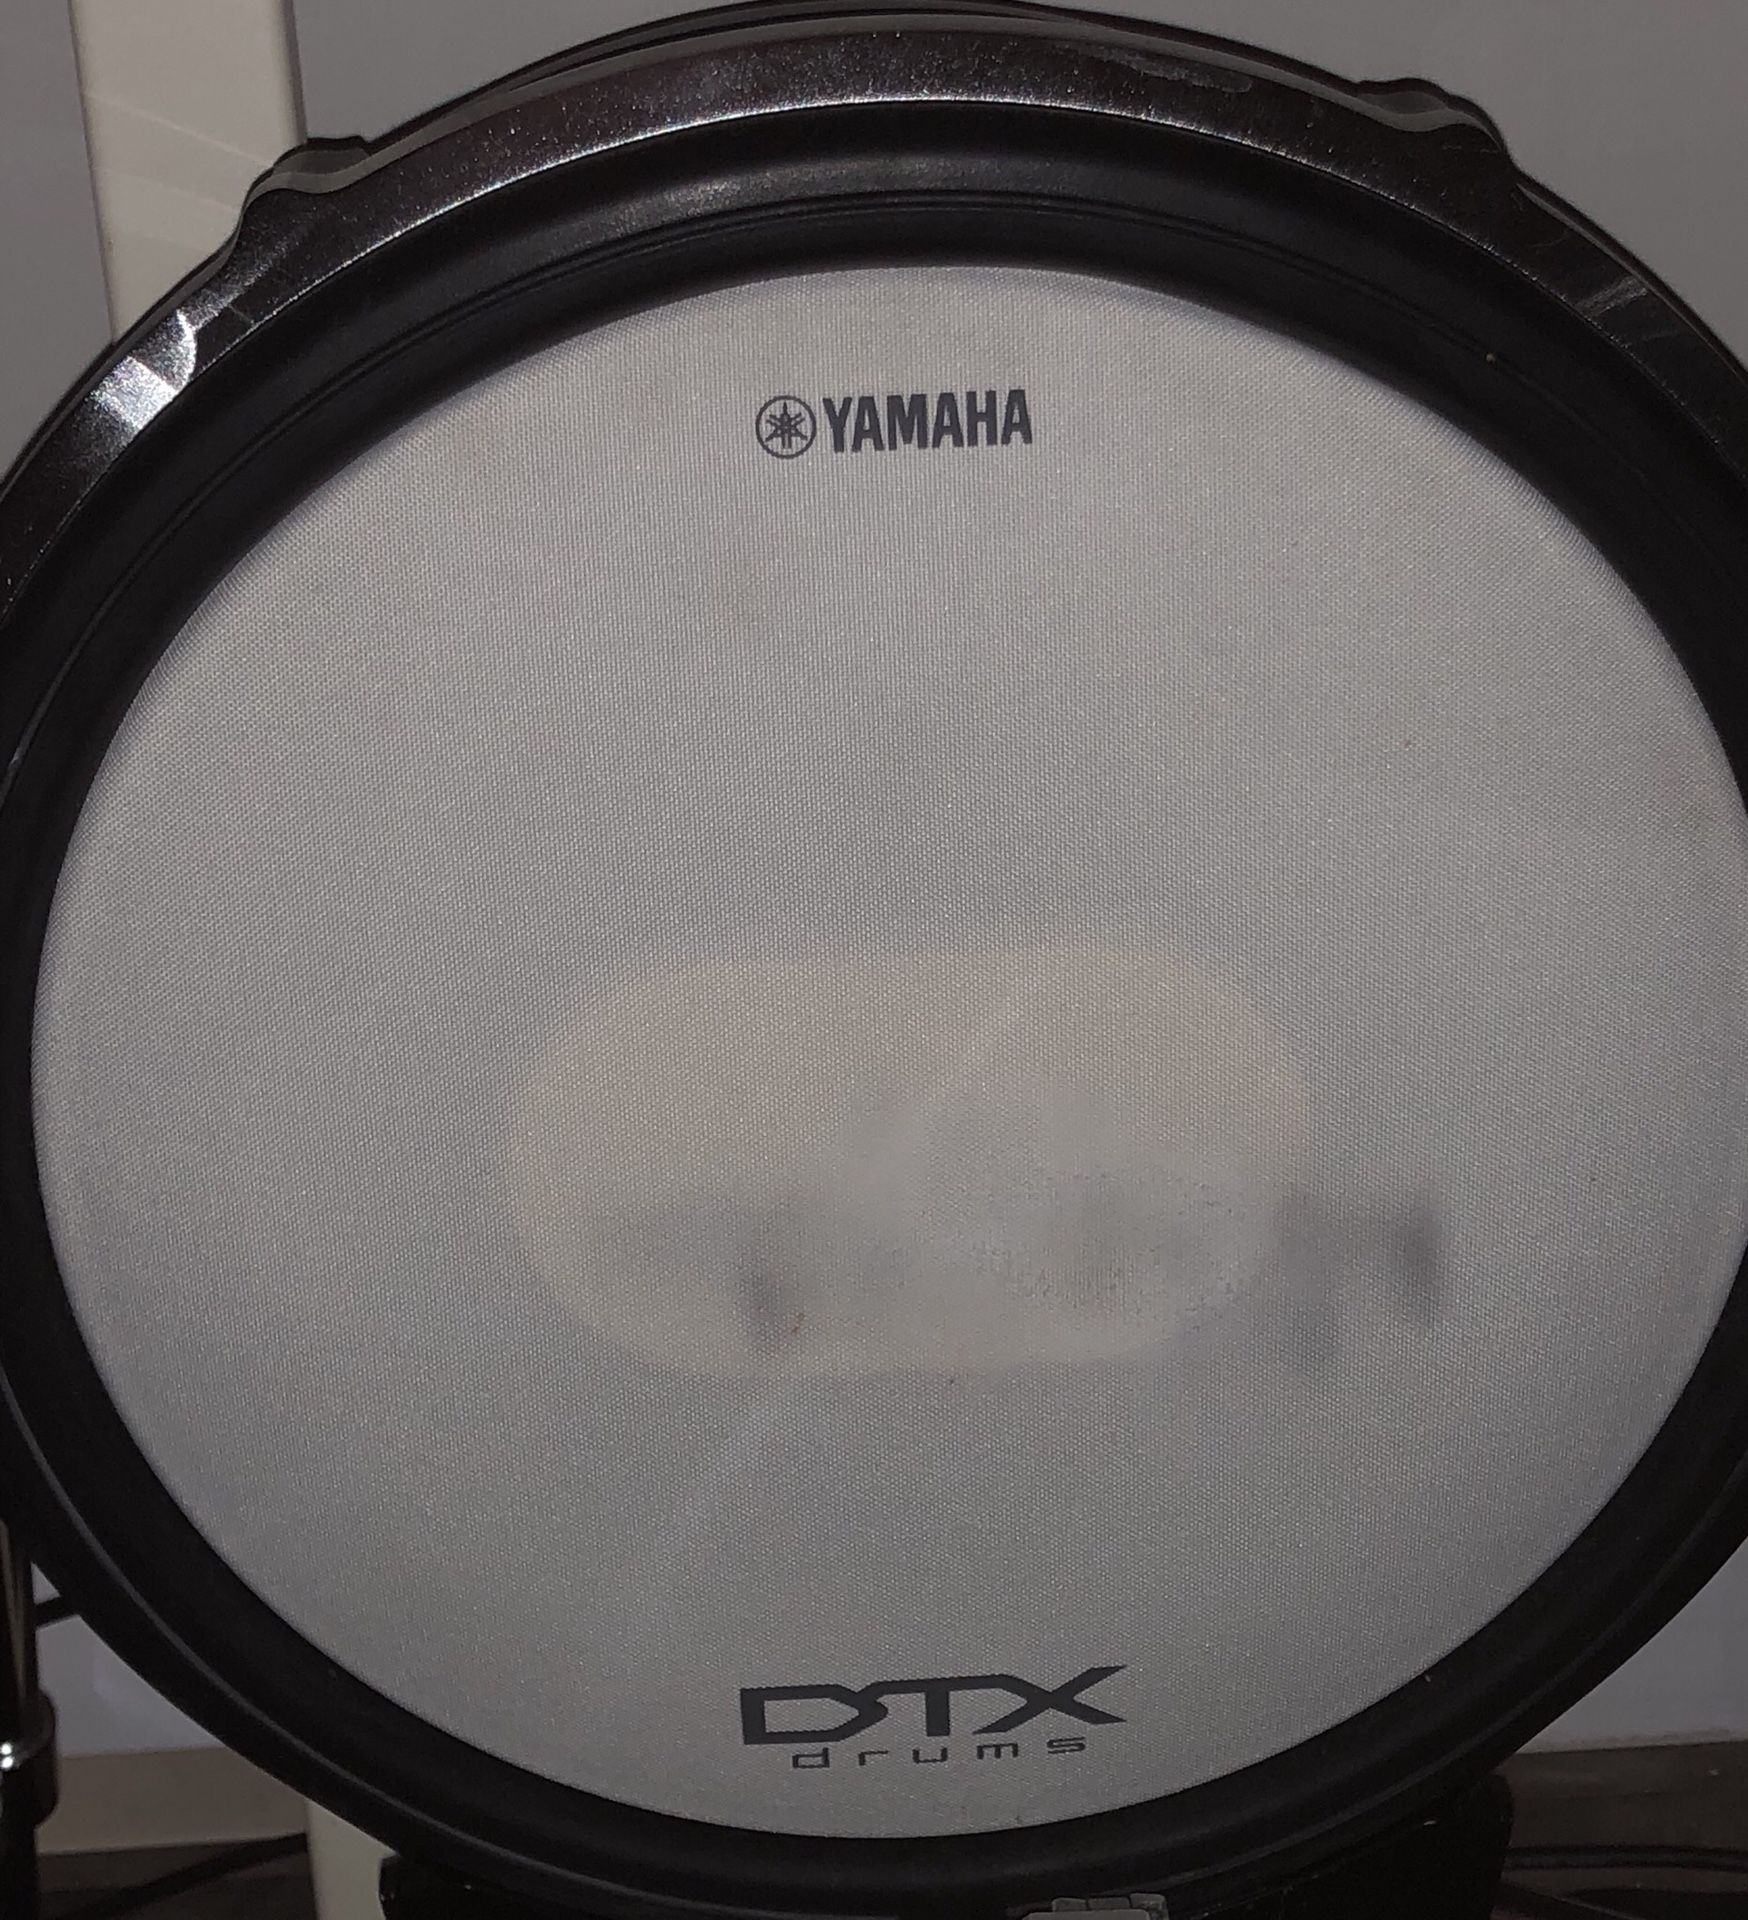 Yamaha KP125W DTX 900 Series Kick/Bass Drum Tower Trigger for Sale